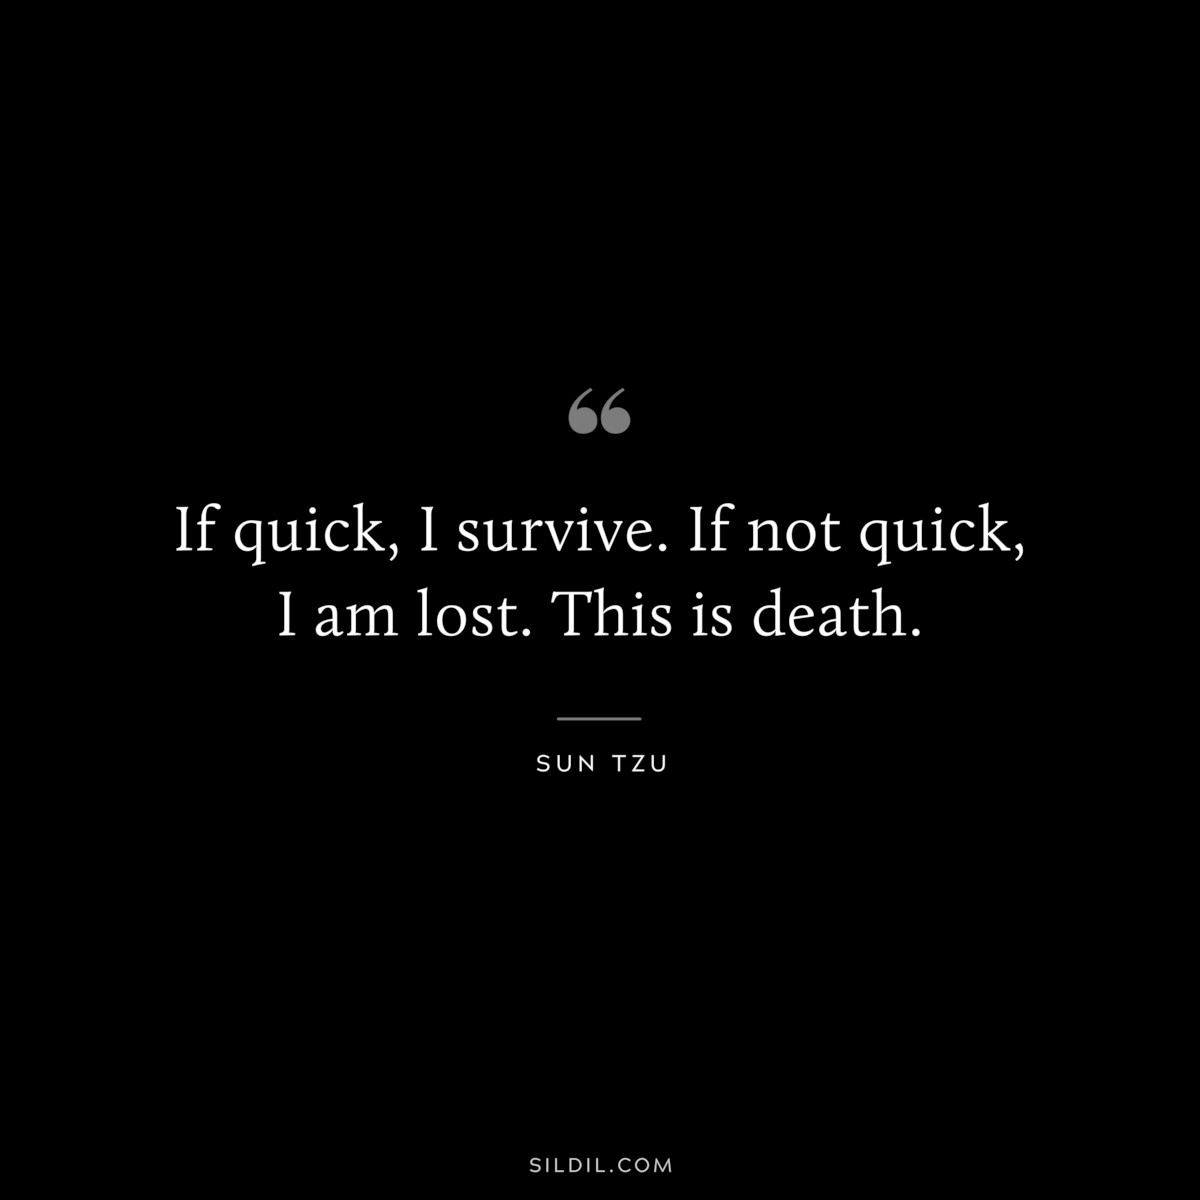 If quick, I survive. If not quick, I am lost. This is death.― Sun Tzu